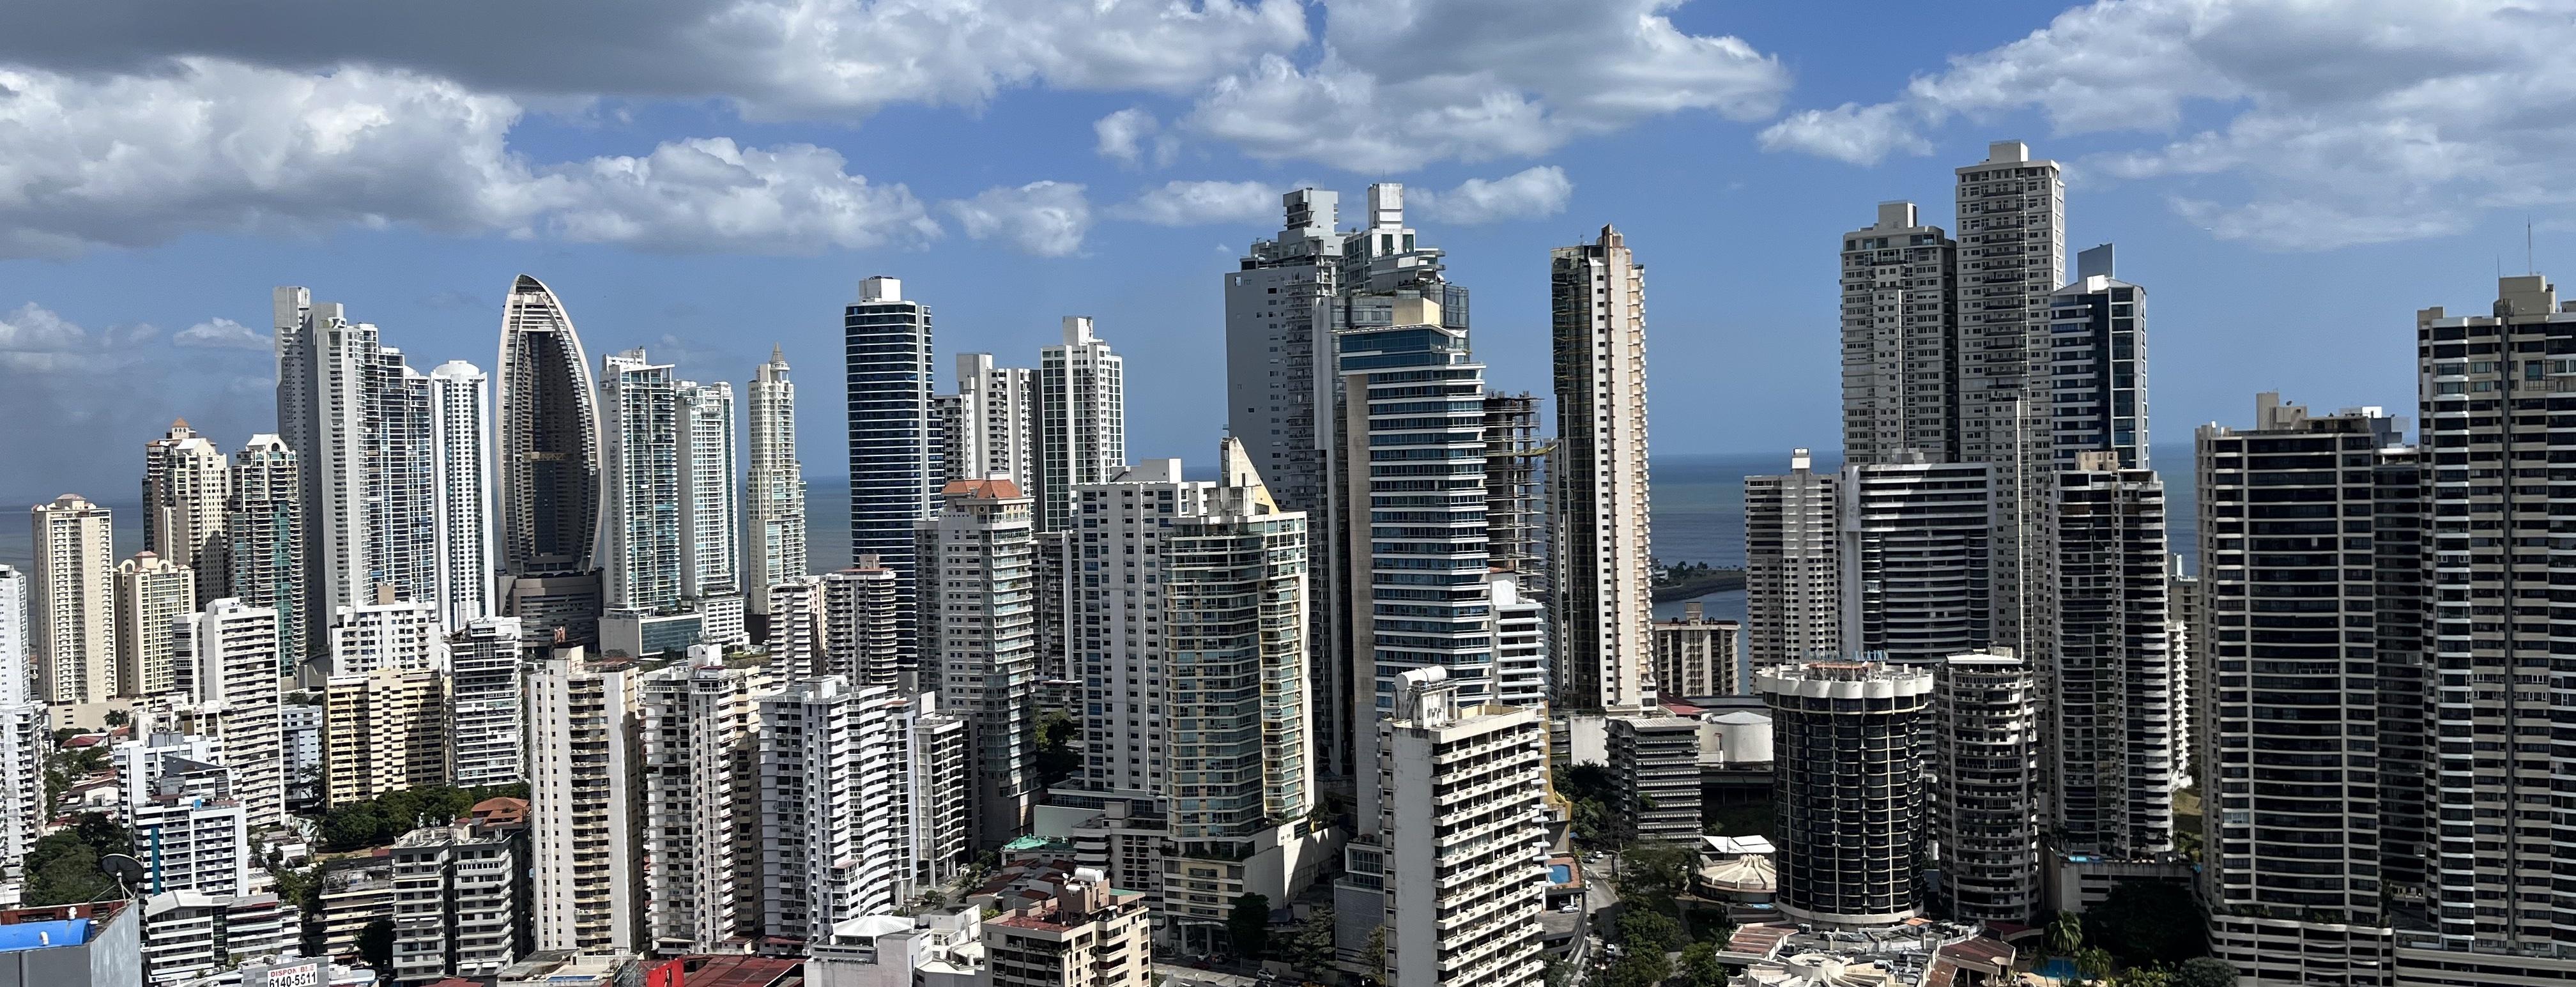 Auragens Stem Cell Clinic Opens in Panama City